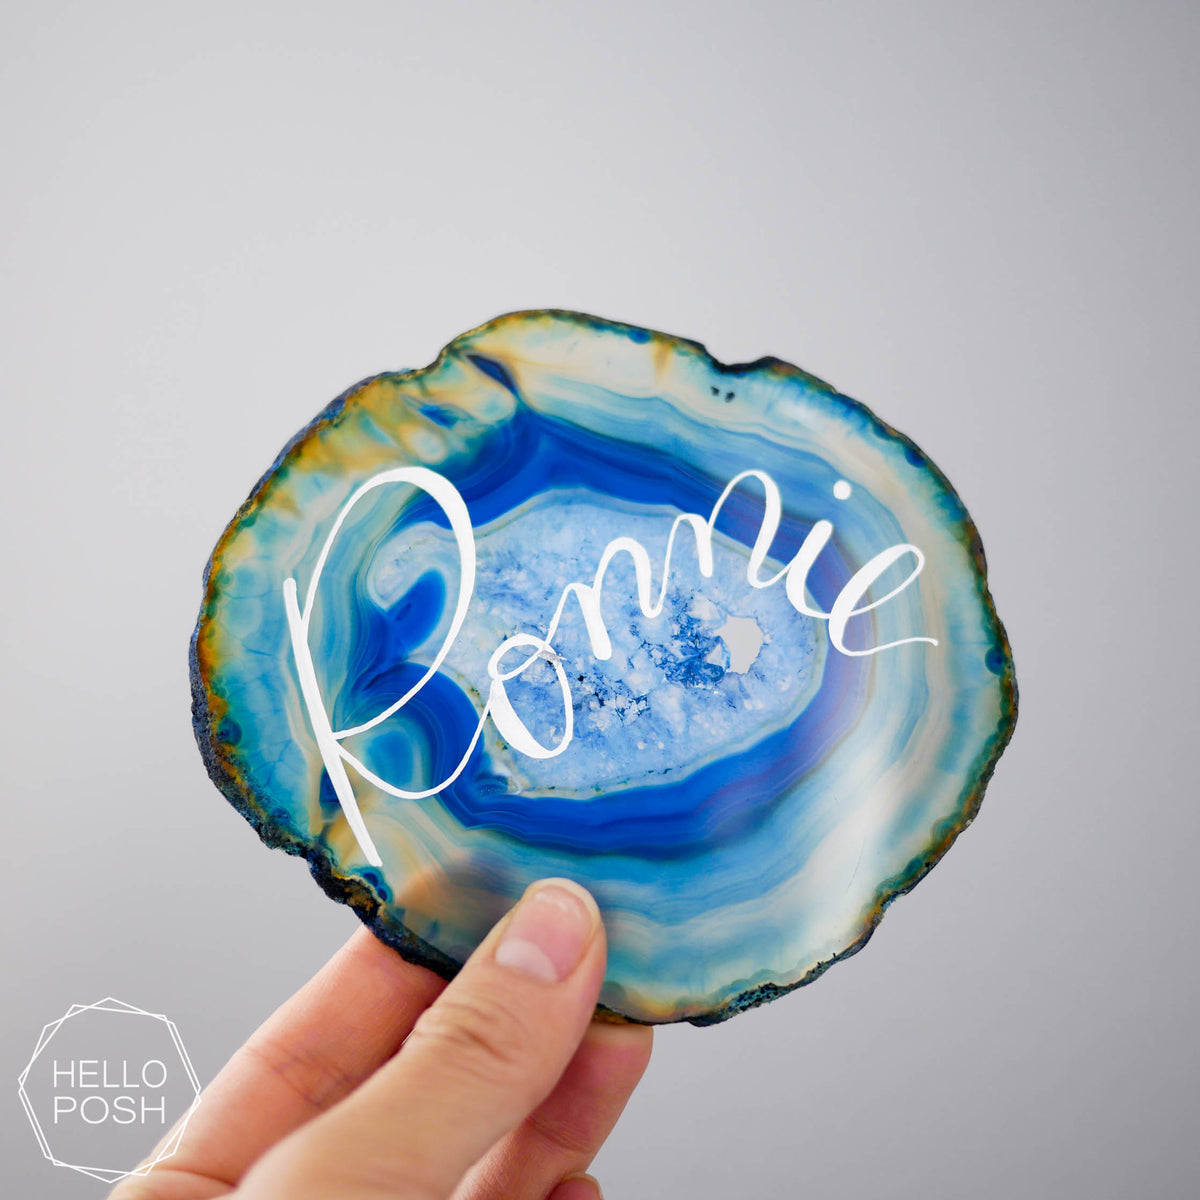 4" Agate coaster place cards